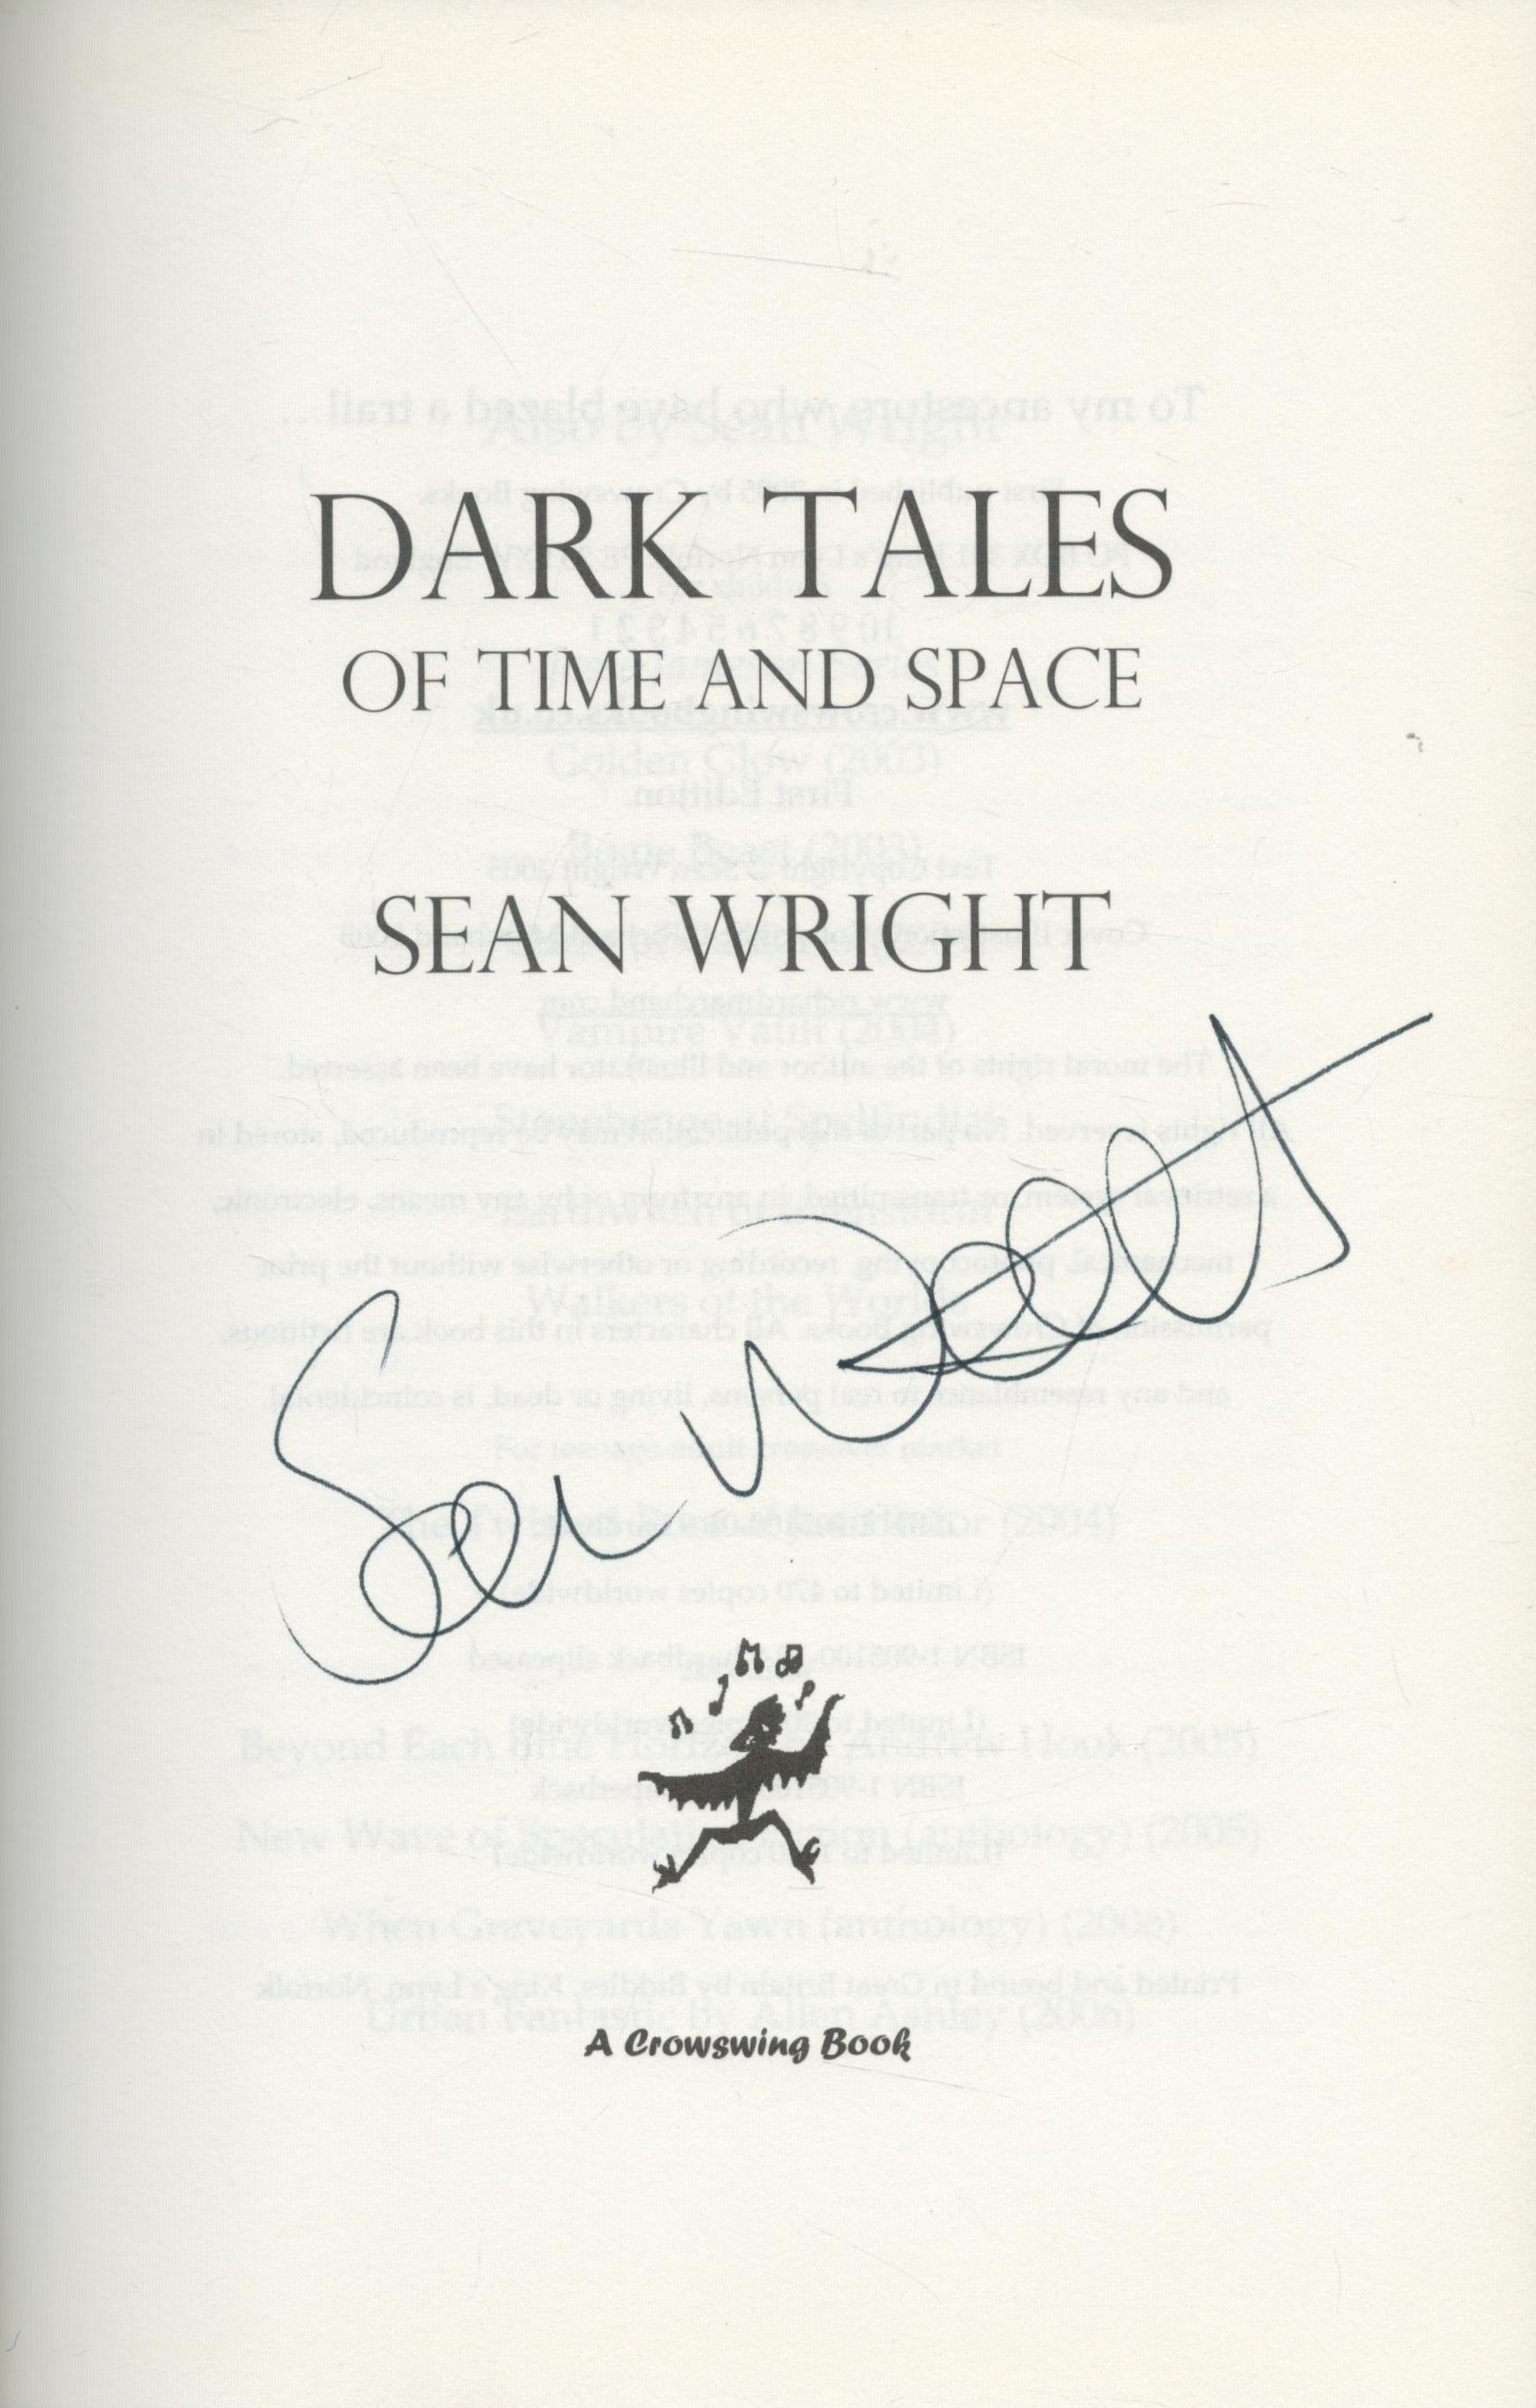 Dark Tales of Time and Space by Sean Wright signed by author. First Edition 2005. Hardback book. - Image 2 of 3